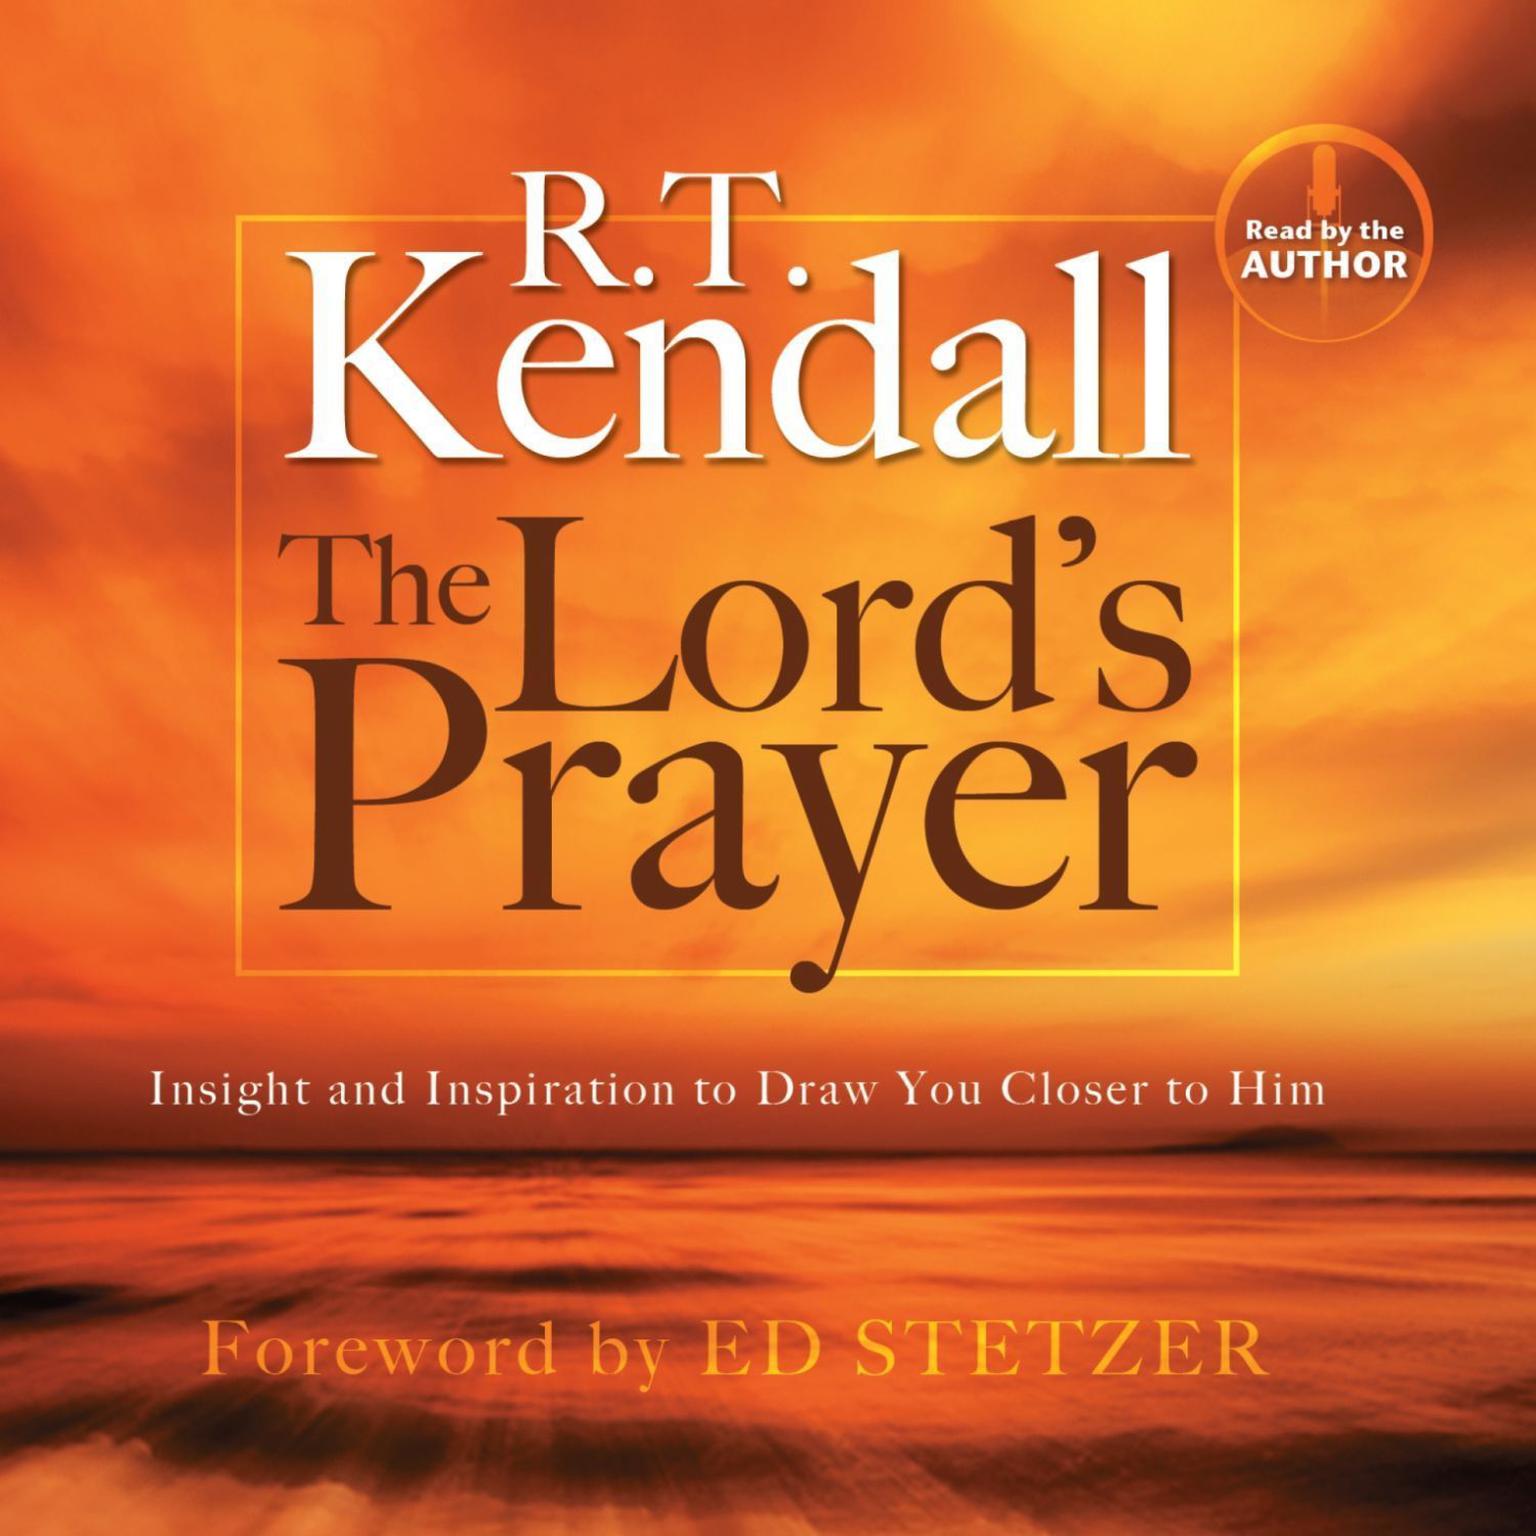 The Lords Prayer: Insight and Inspiration to Draw You Closer to Him Audiobook, by R. T. Kendall